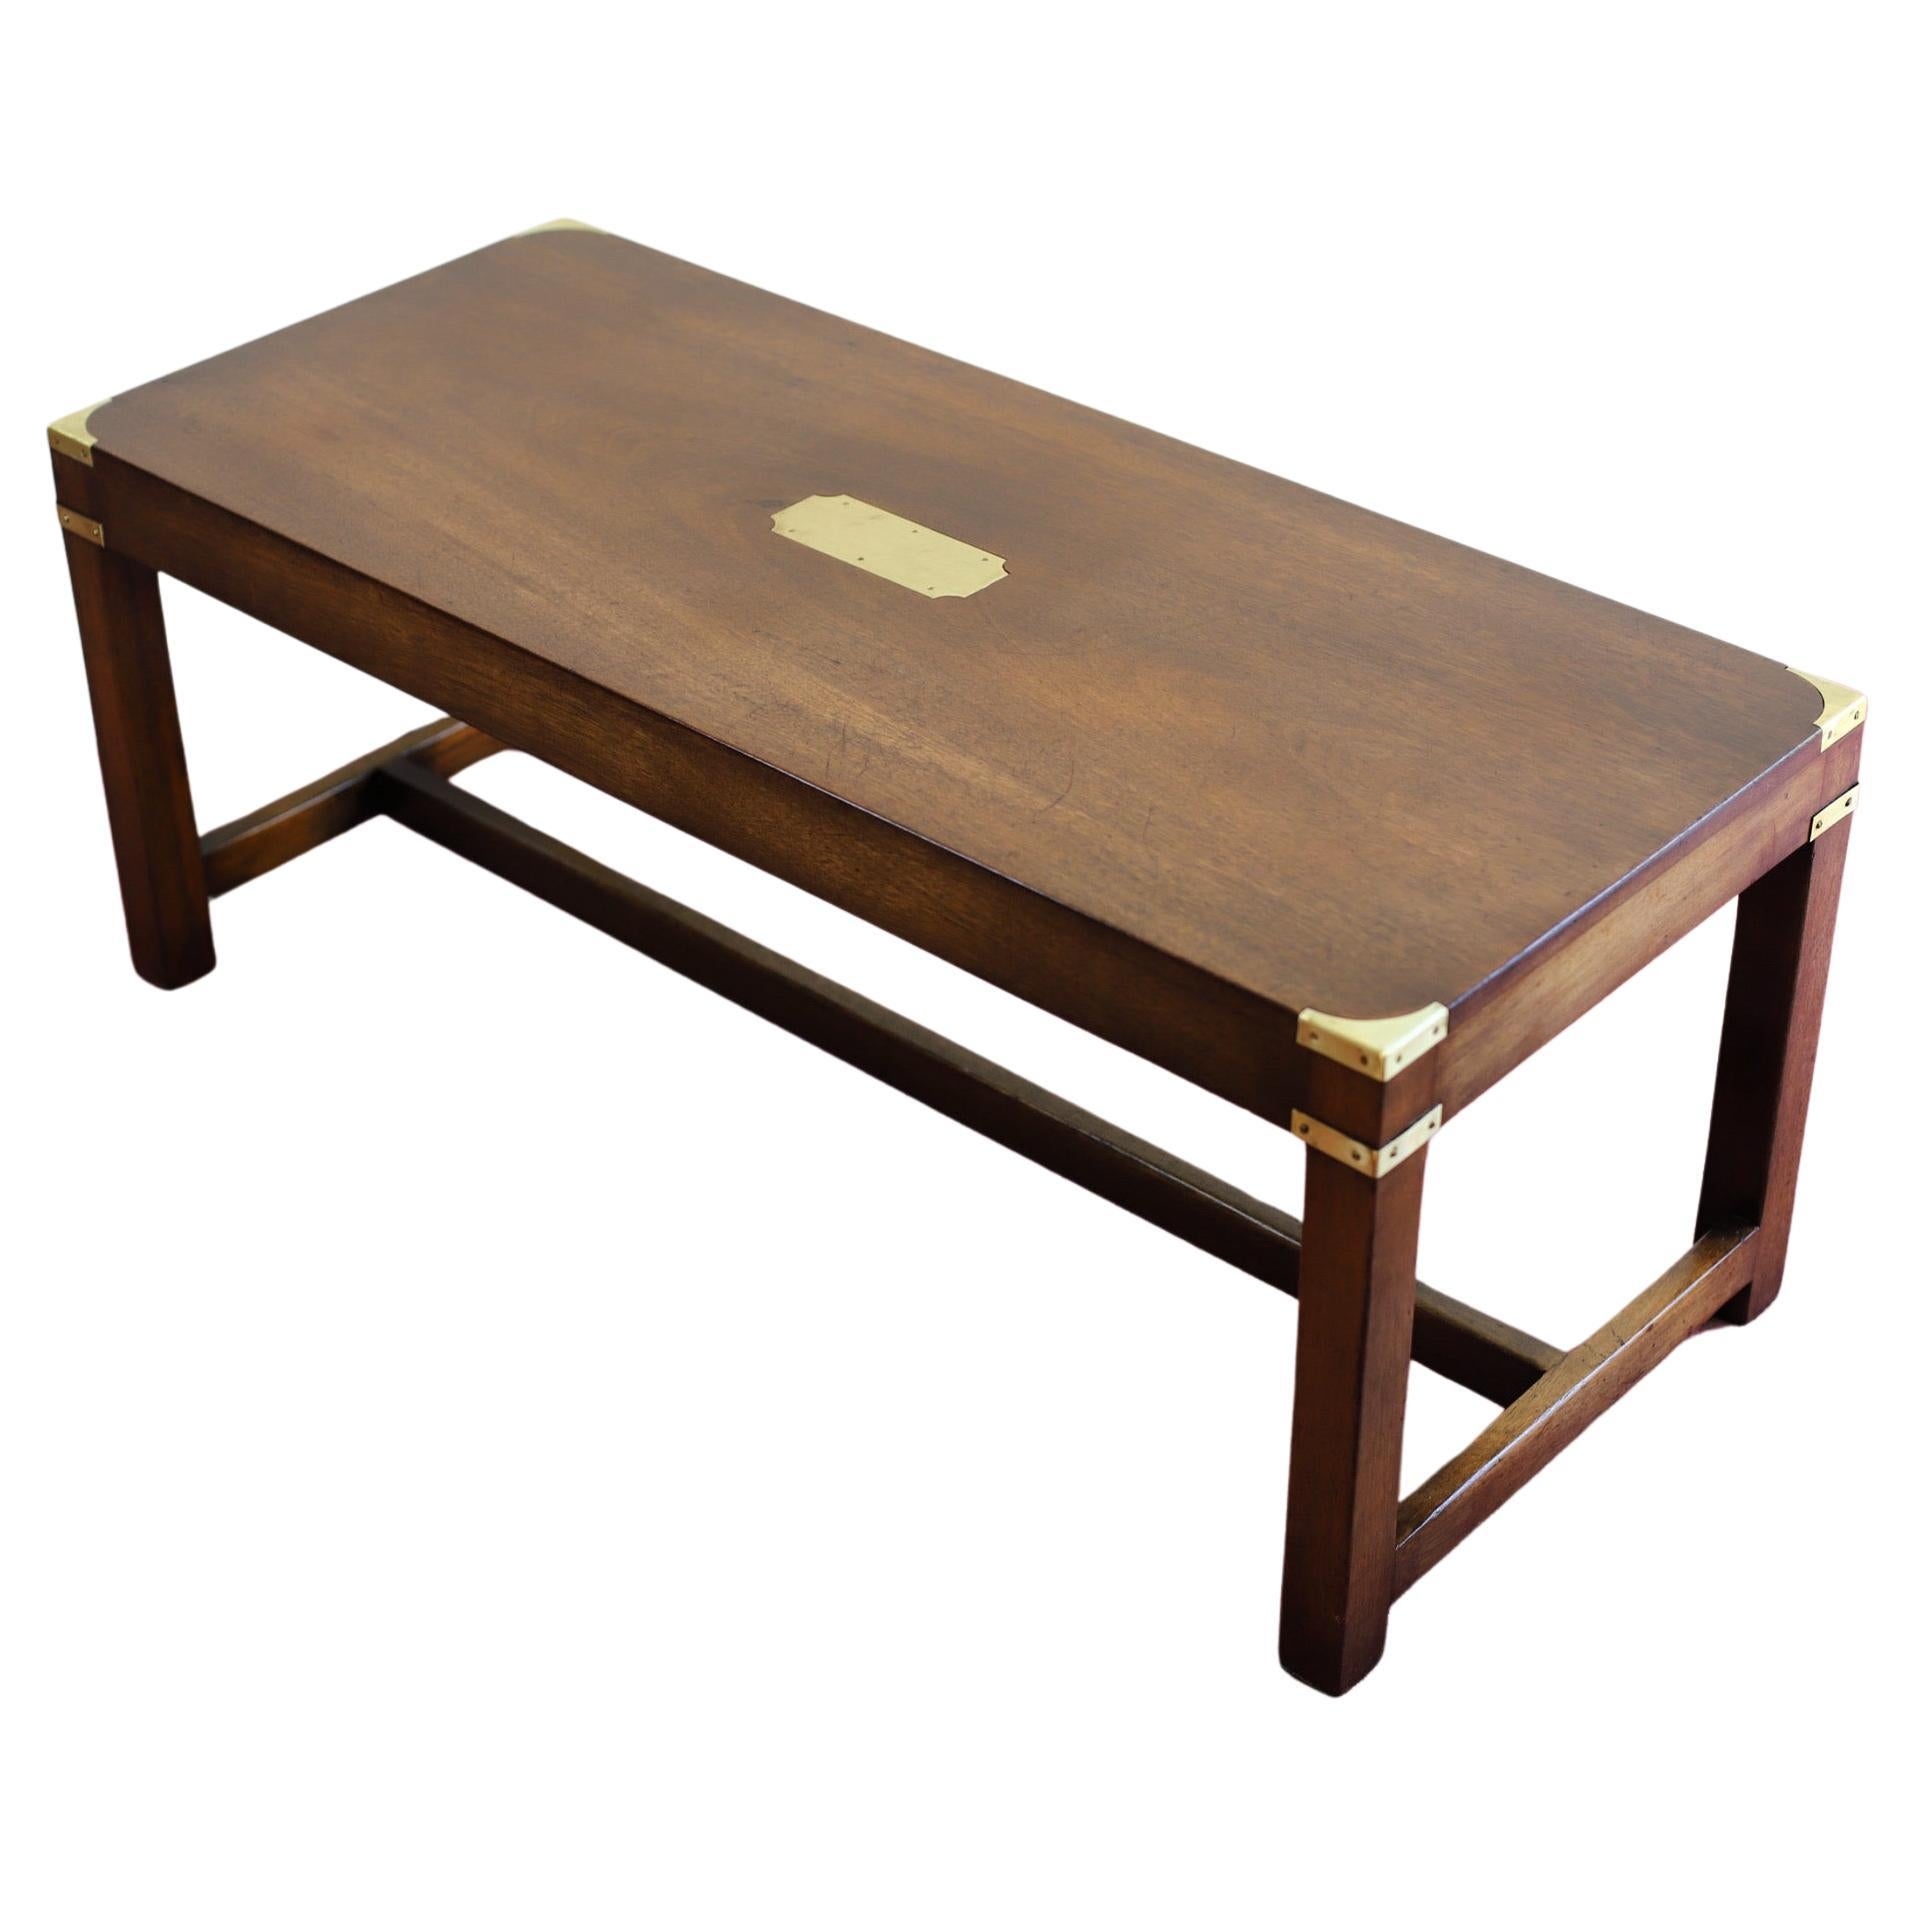 Lovelly Harrods Military Campaign Oak&Brass Coffee Table For Sale